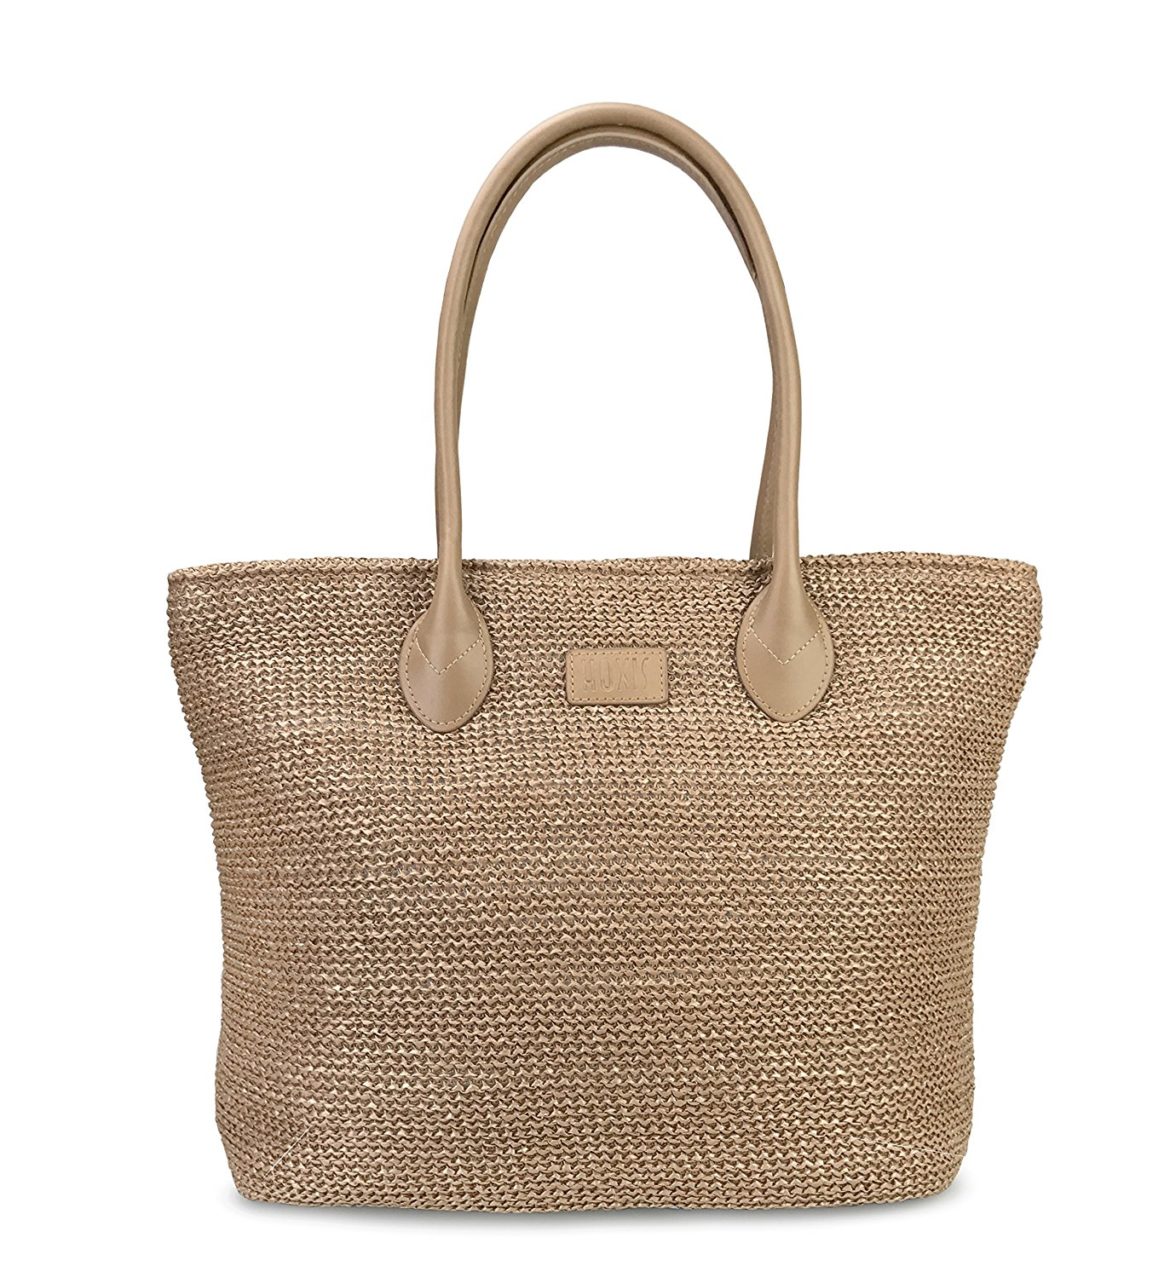 Hoxis Weekender Lightweight Synthetic Straw Shopper Tote Womens ...